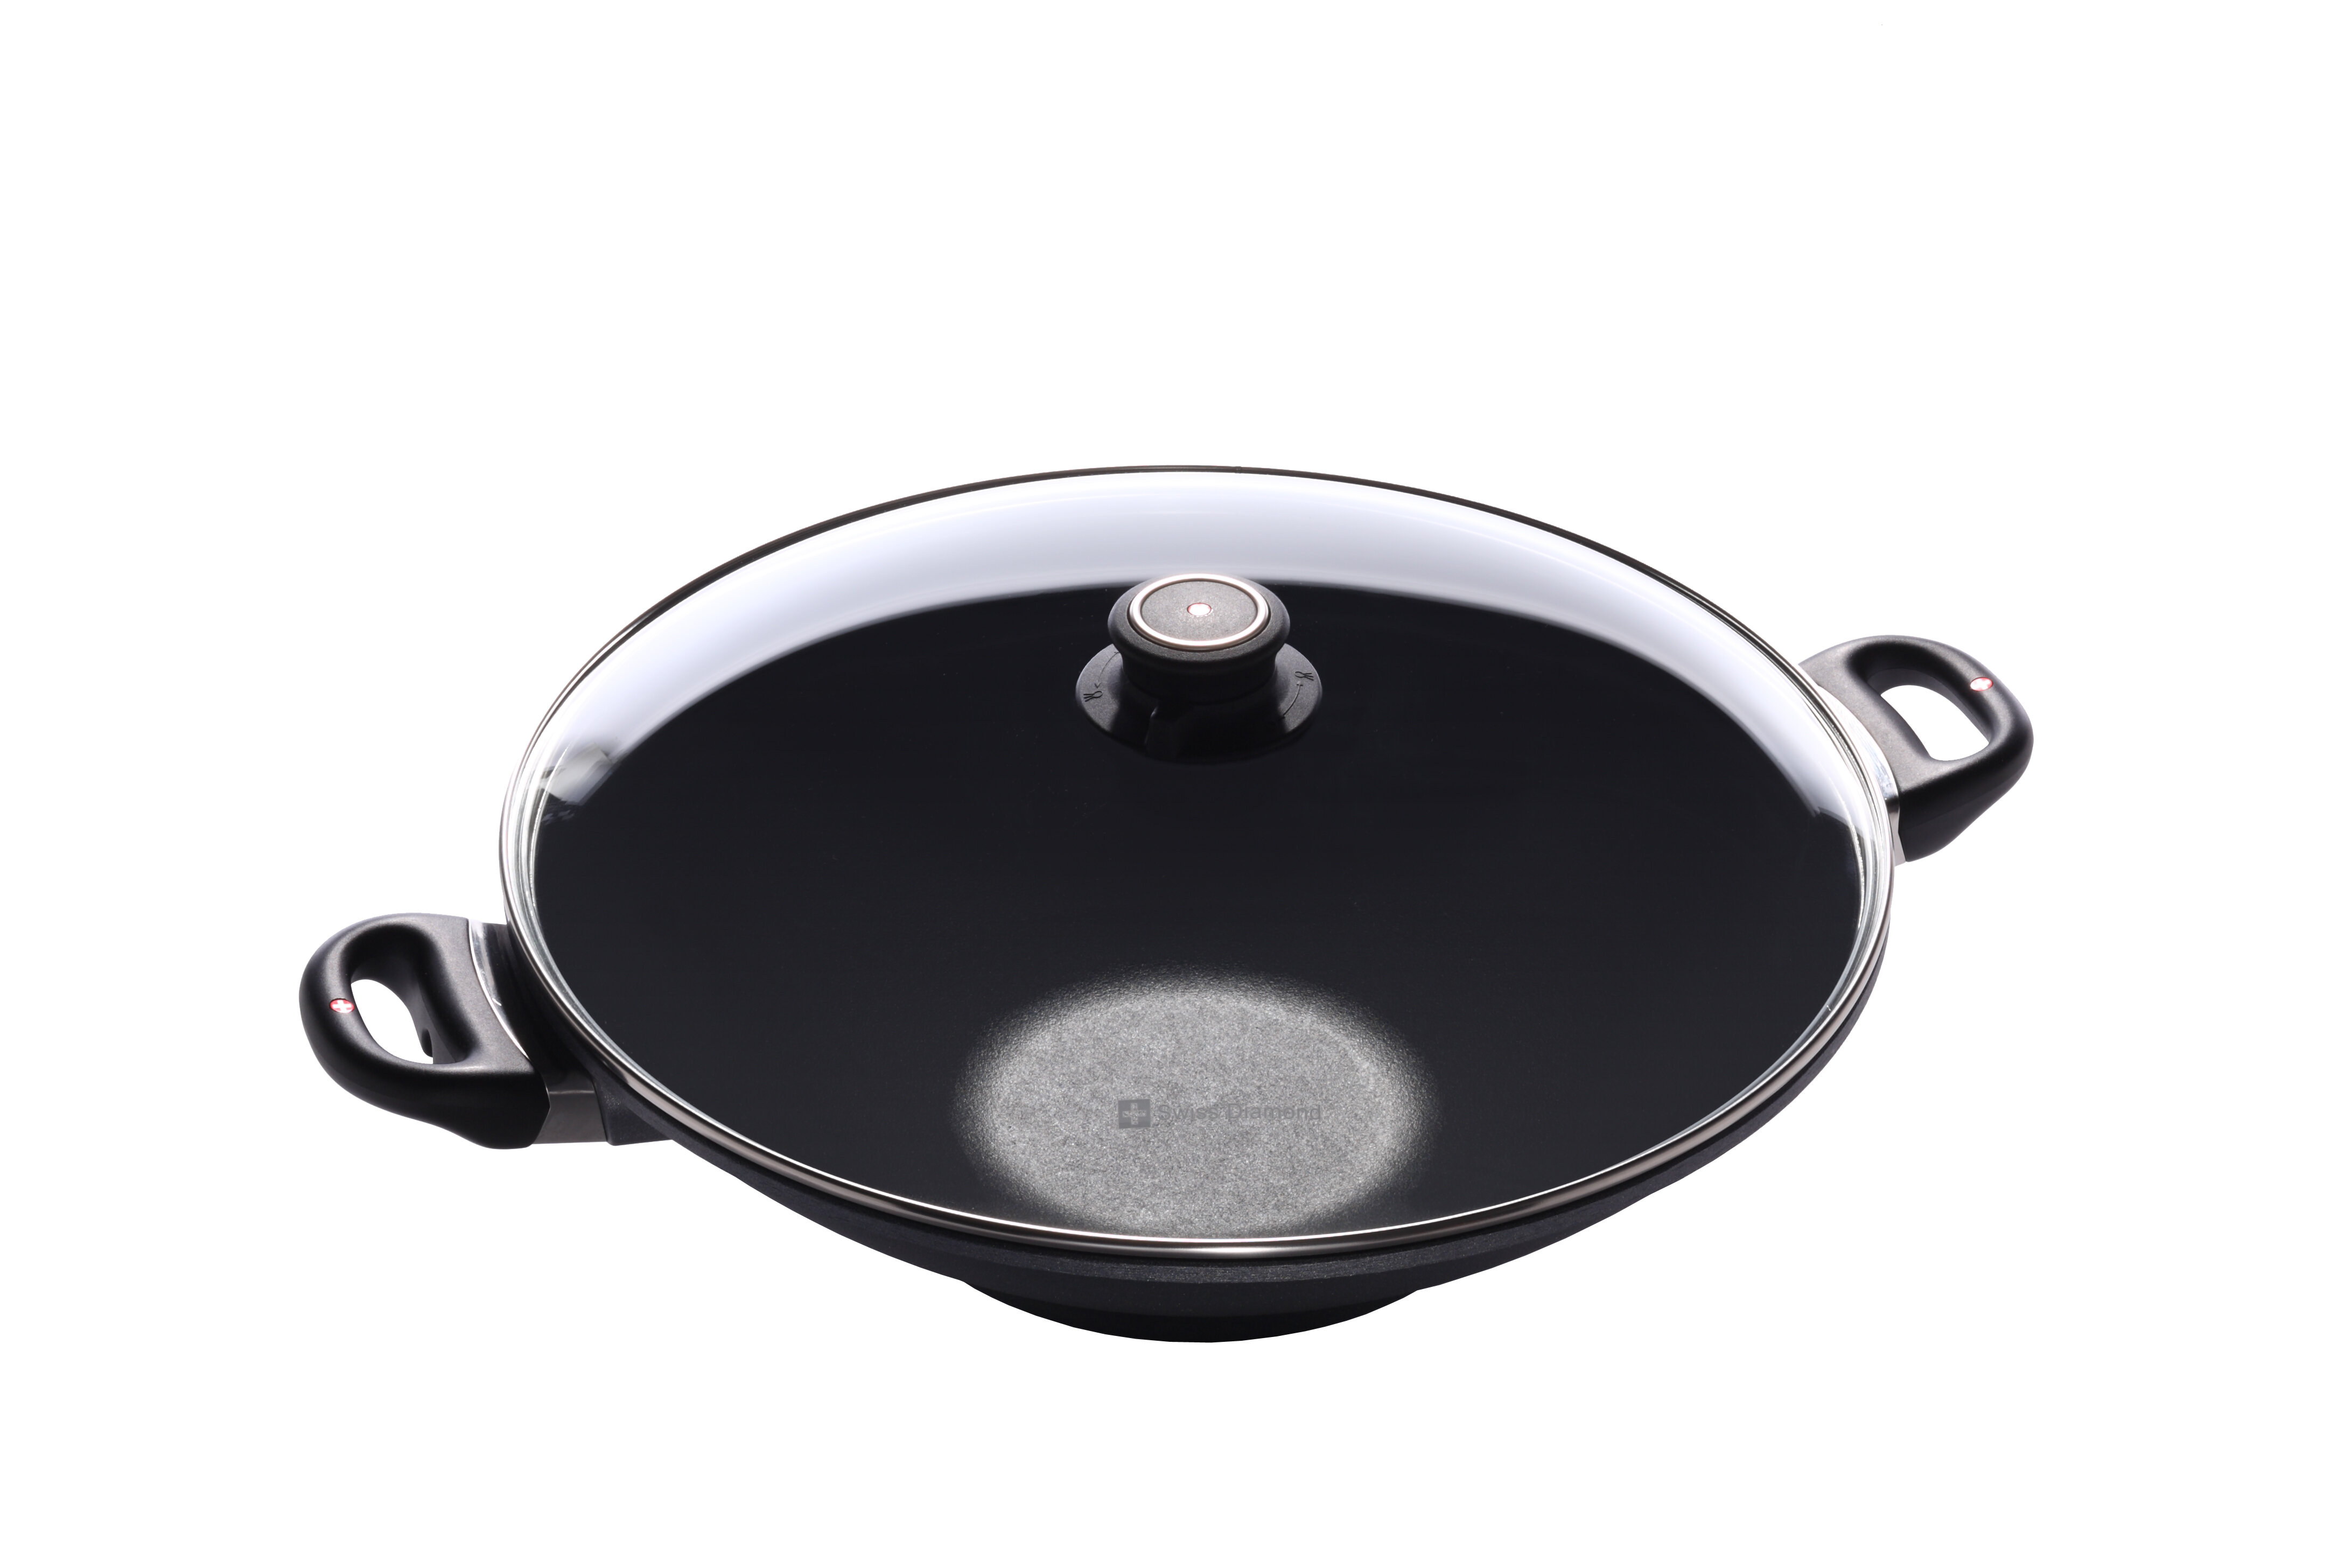 Swiss Diamond Induction Nonstick Wok with Lid - 14